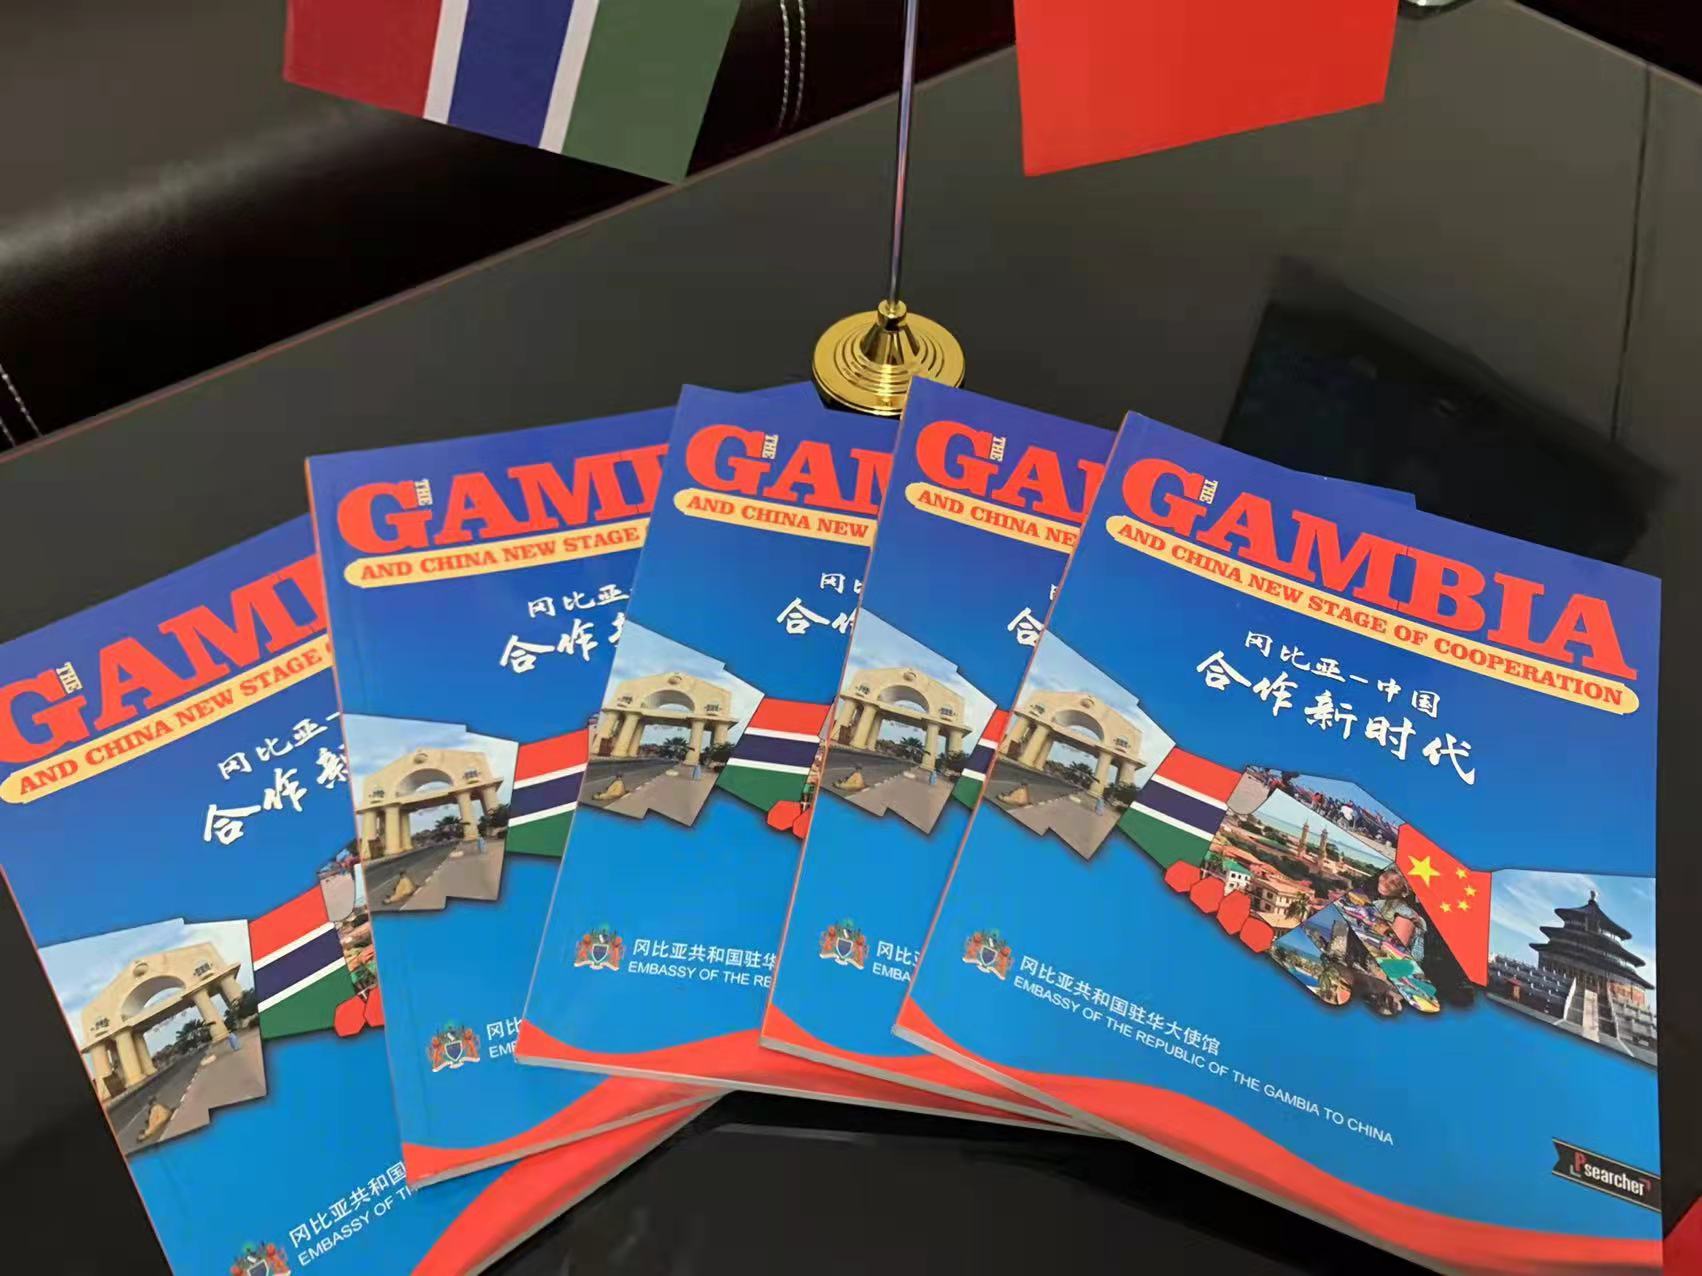 The Embassy Of The Republic Of The Gambia In Beijing, China Published Its Maiden Edition Of a Specia